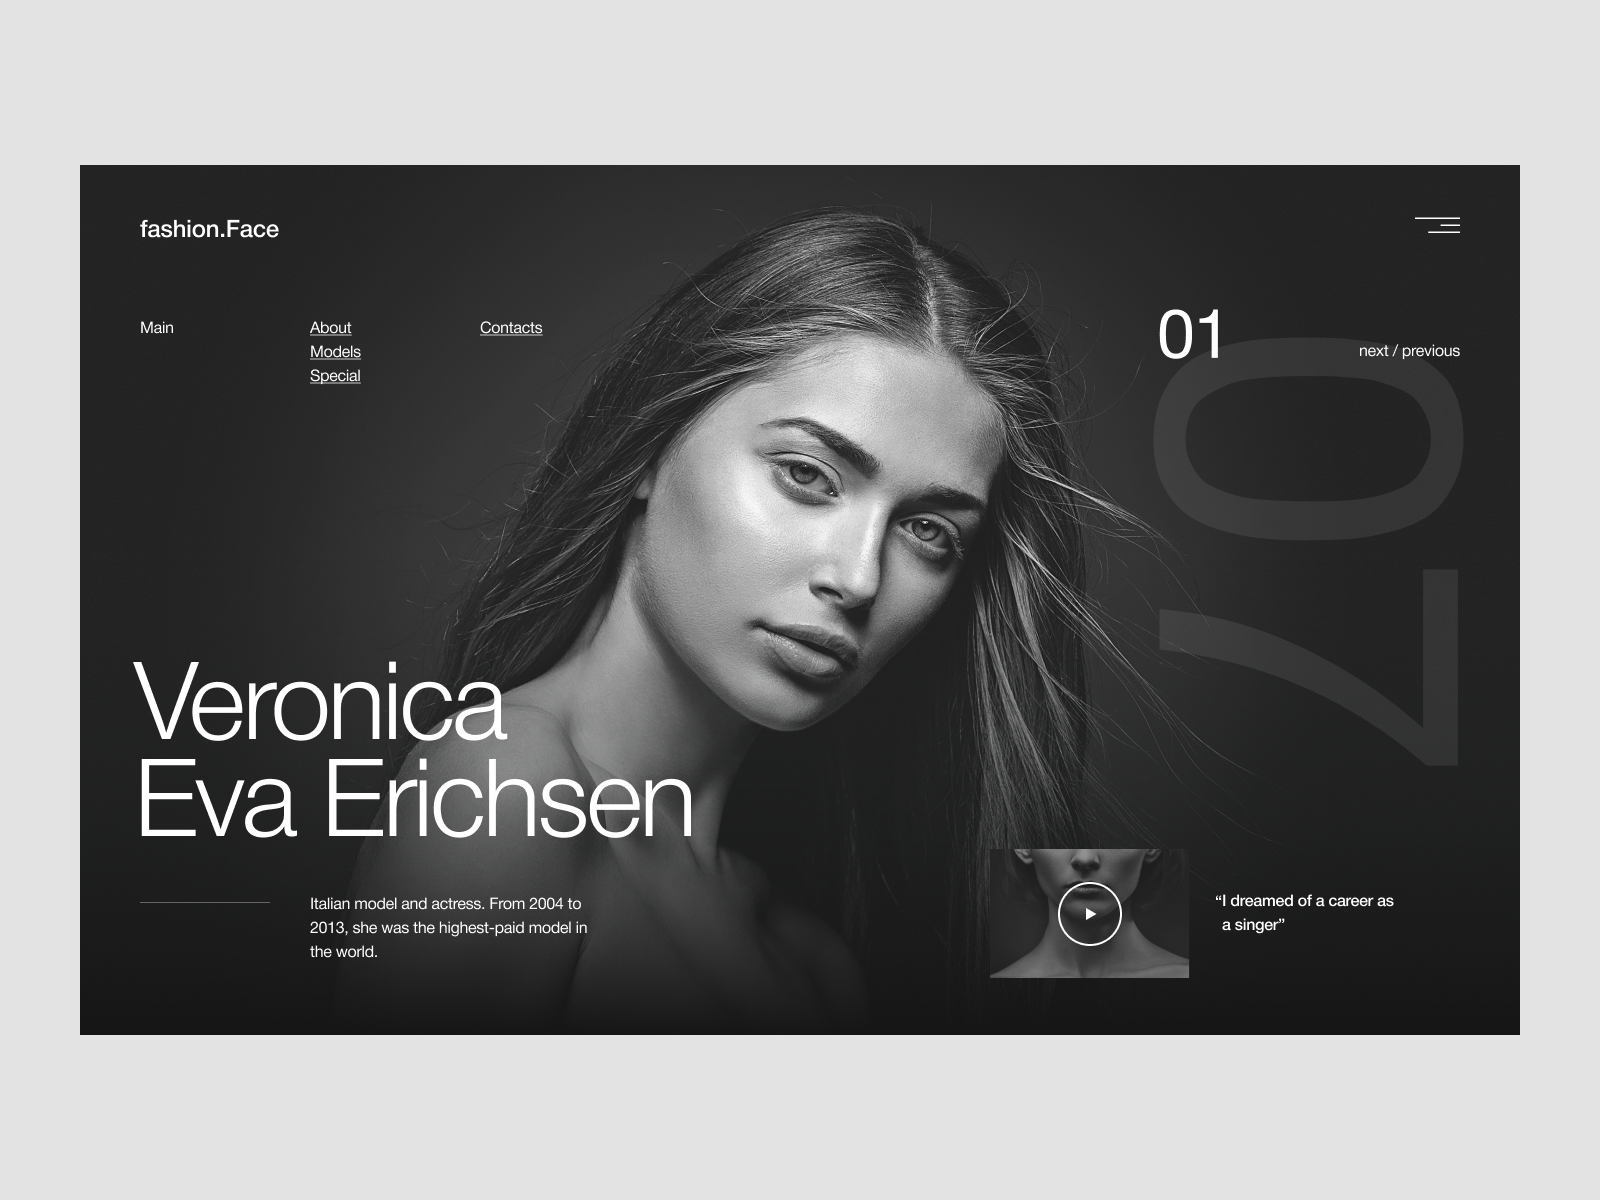 fashion.Face - Concept by Andrey Novickov on Dribbble